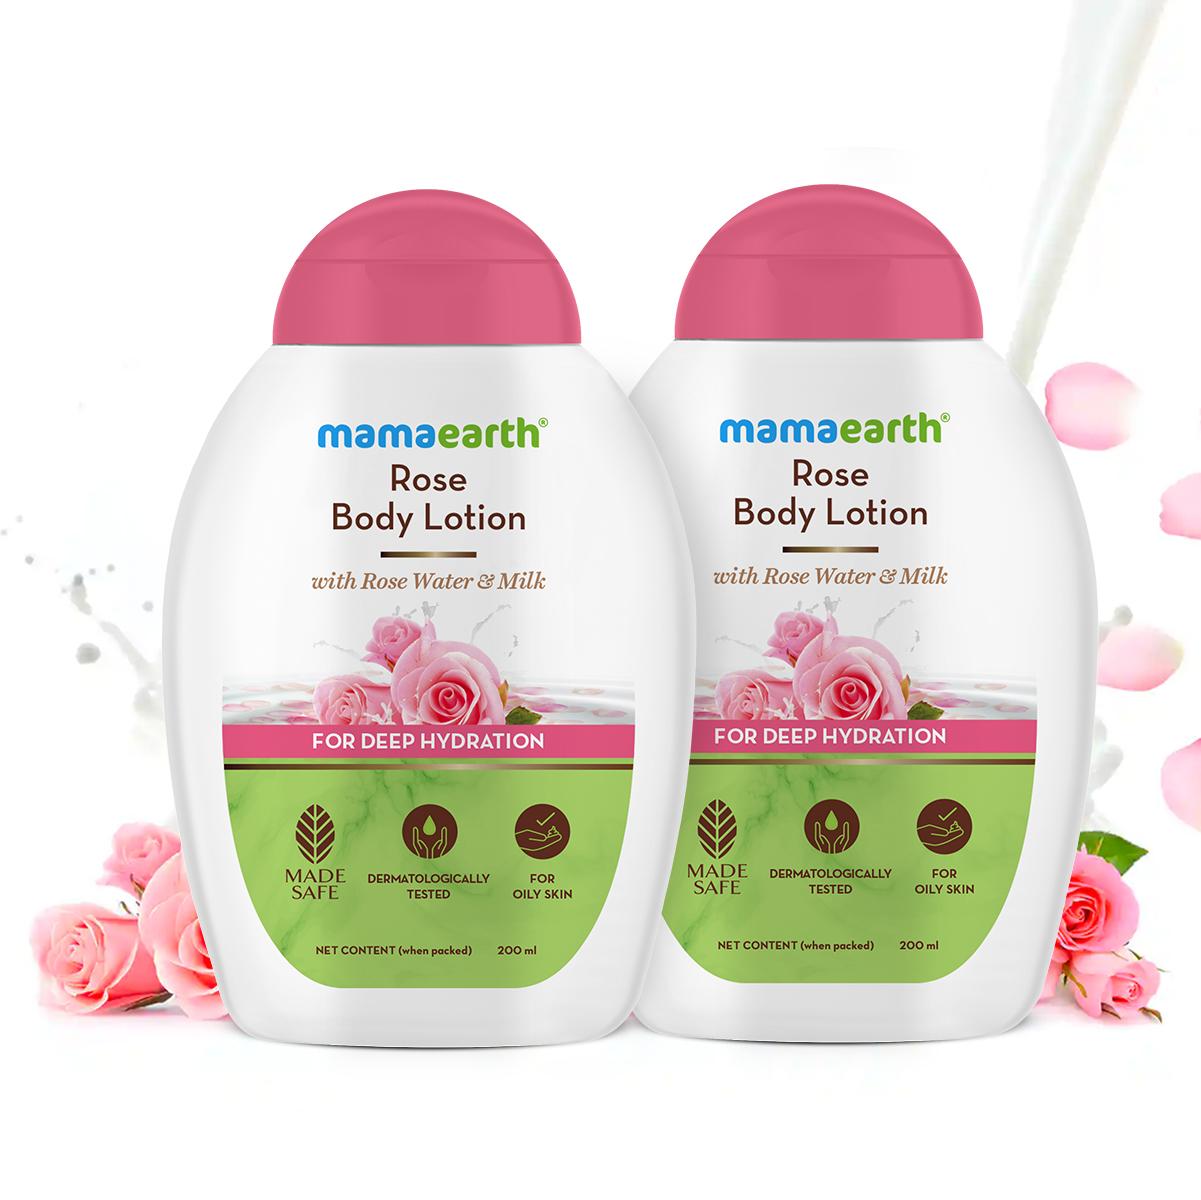 rose body lotion with rose water and milk for deep hydration (pack of 2) - 200 ml